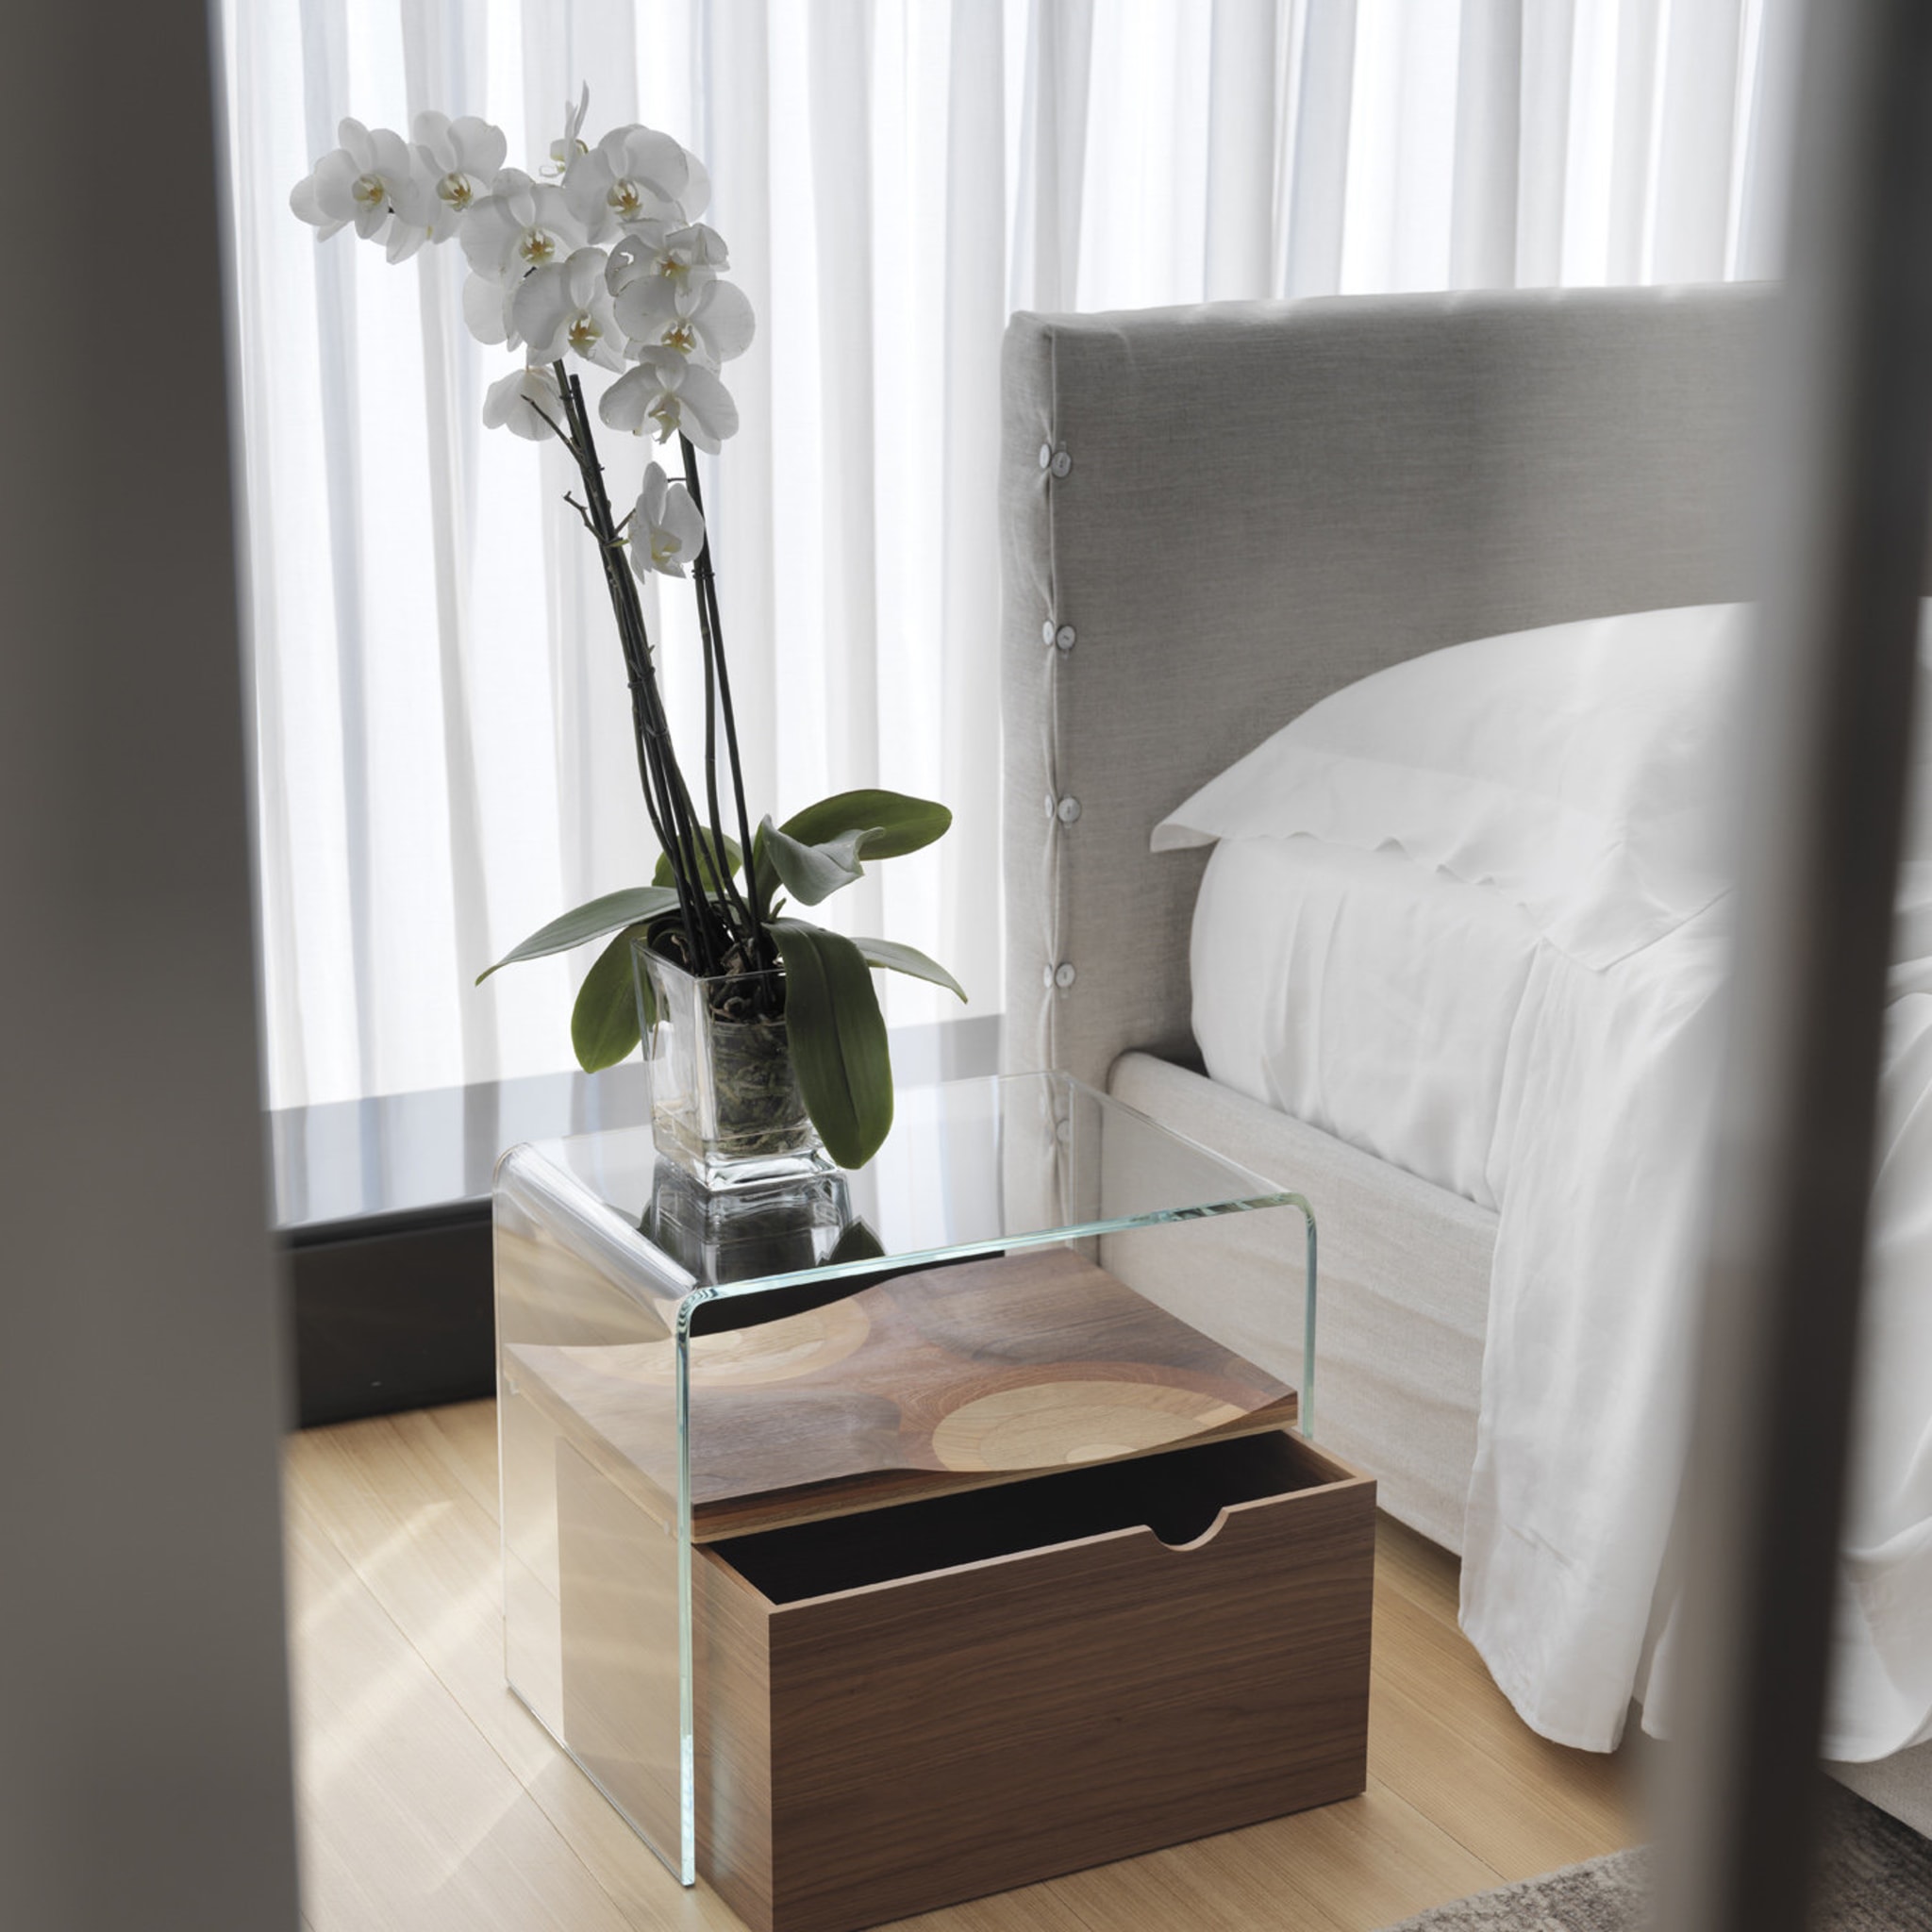 Bifronte Nightstand with Drawer by Toyo Ito - Alternative view 2